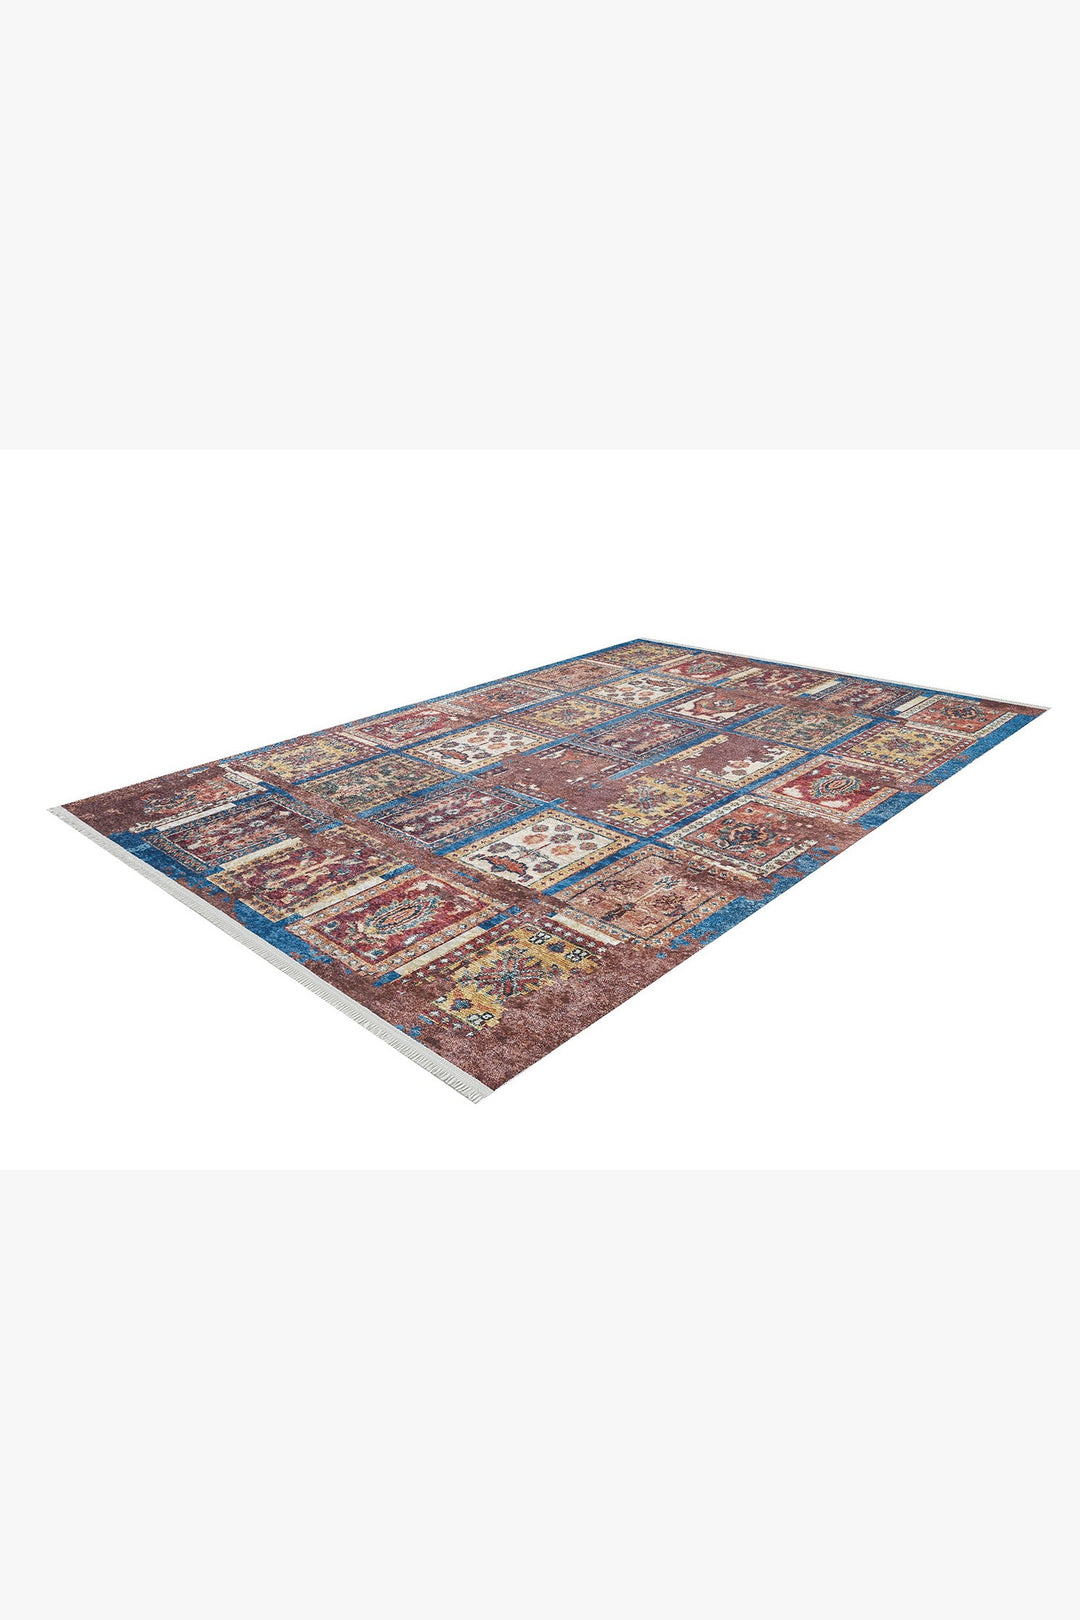 machine-washable-area-rug-Tribal-Ethnic-Collection-Blue-Multicolor-JR1596